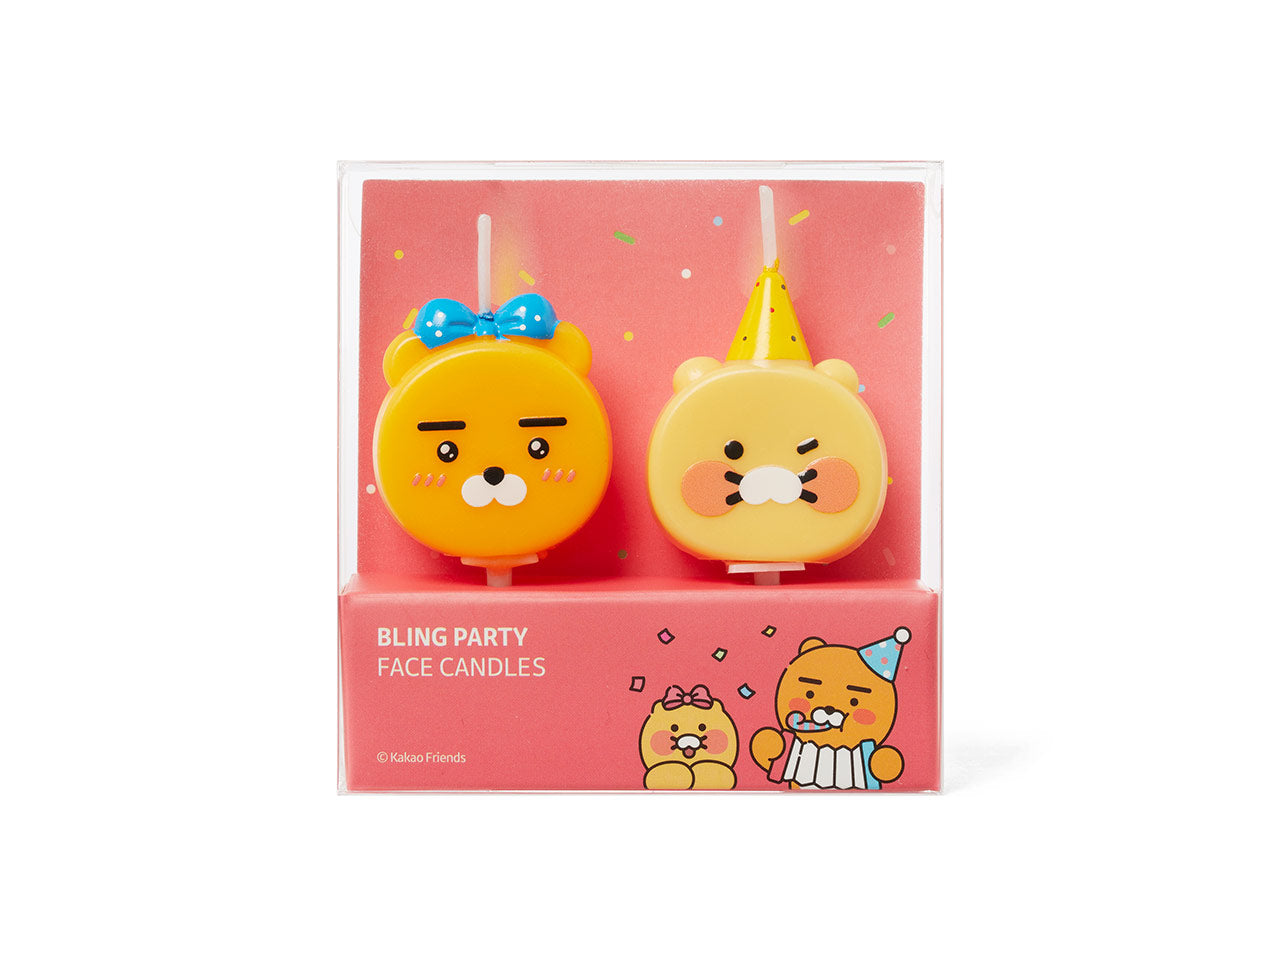 [KAKAO FRIENDS] Bling Party Face Candle 2P Set OFFICIAL MD